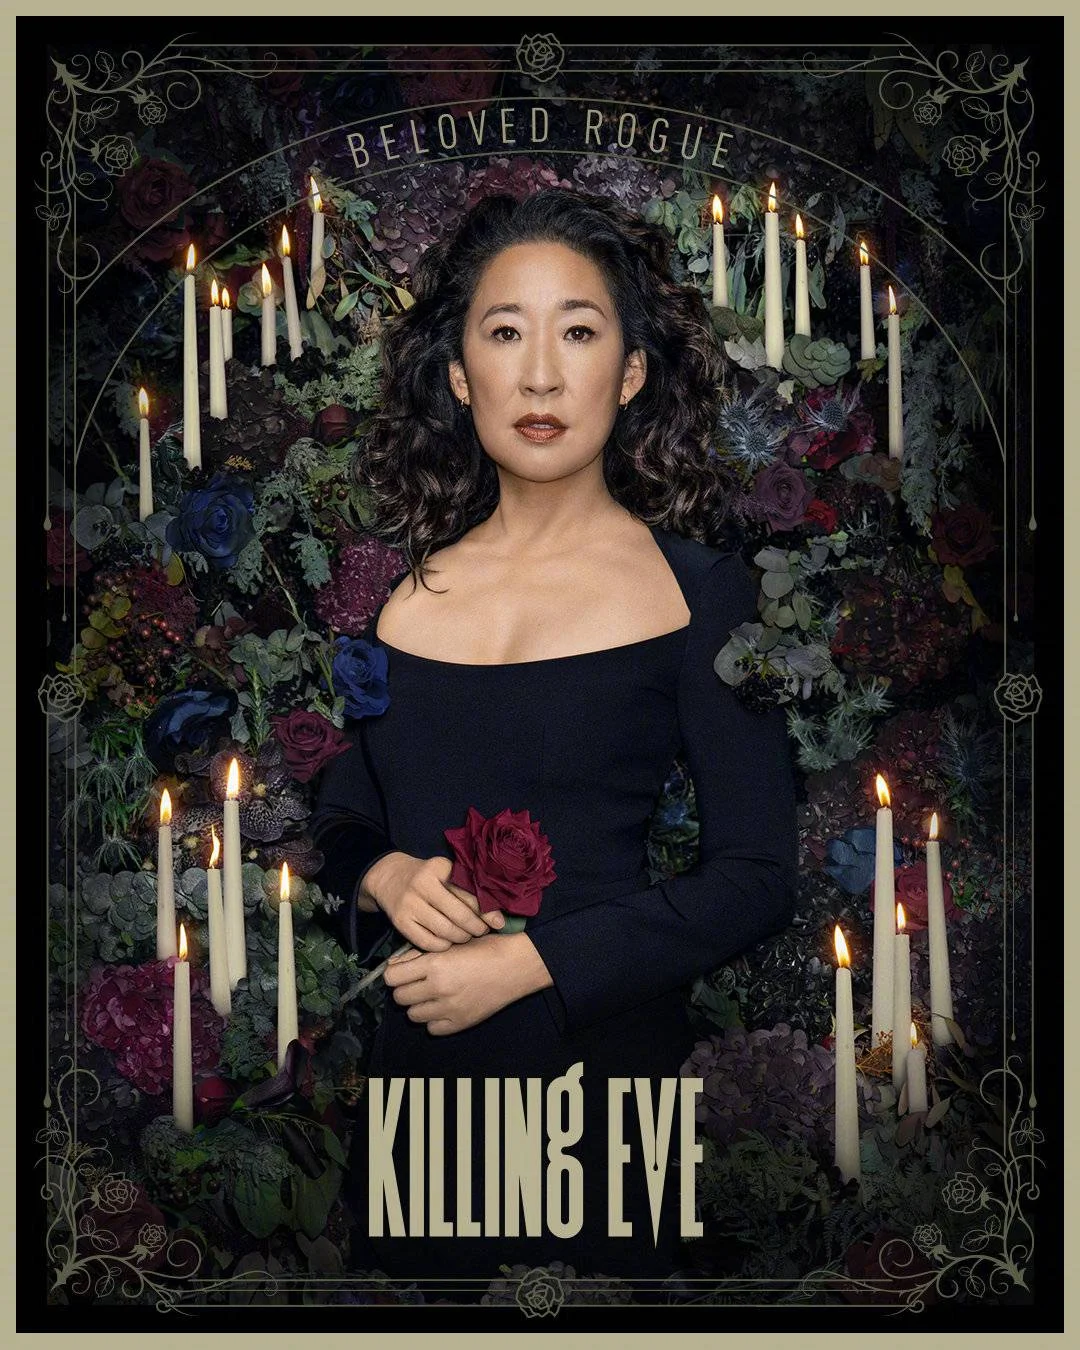 'Killing Eve' final season released character posters